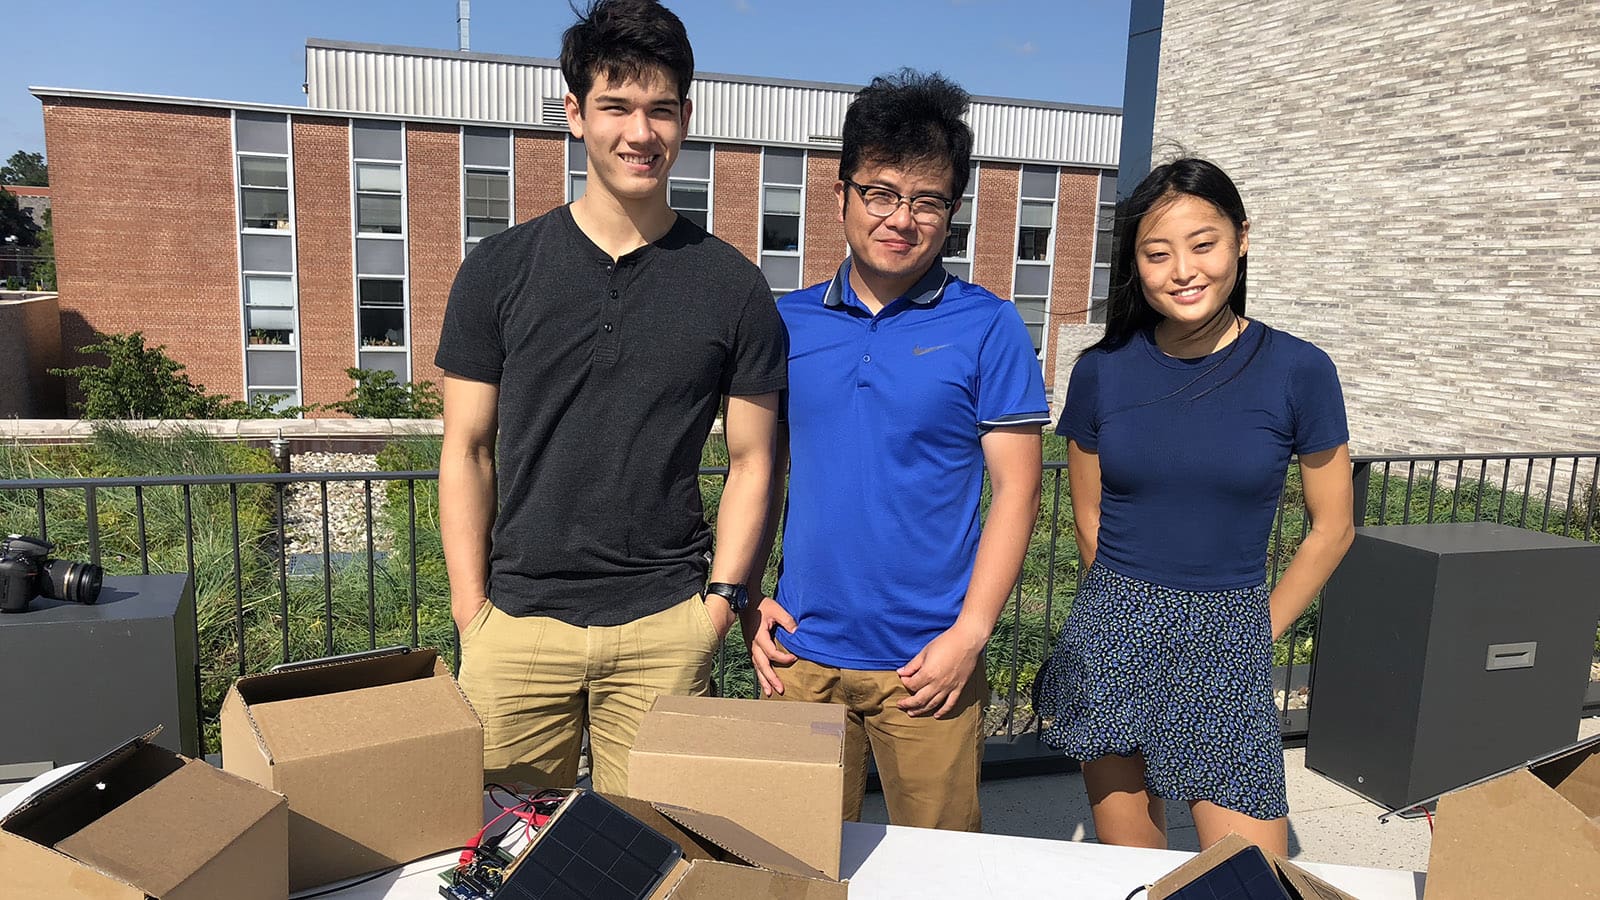 Three students stand on rooftop with small solar panels